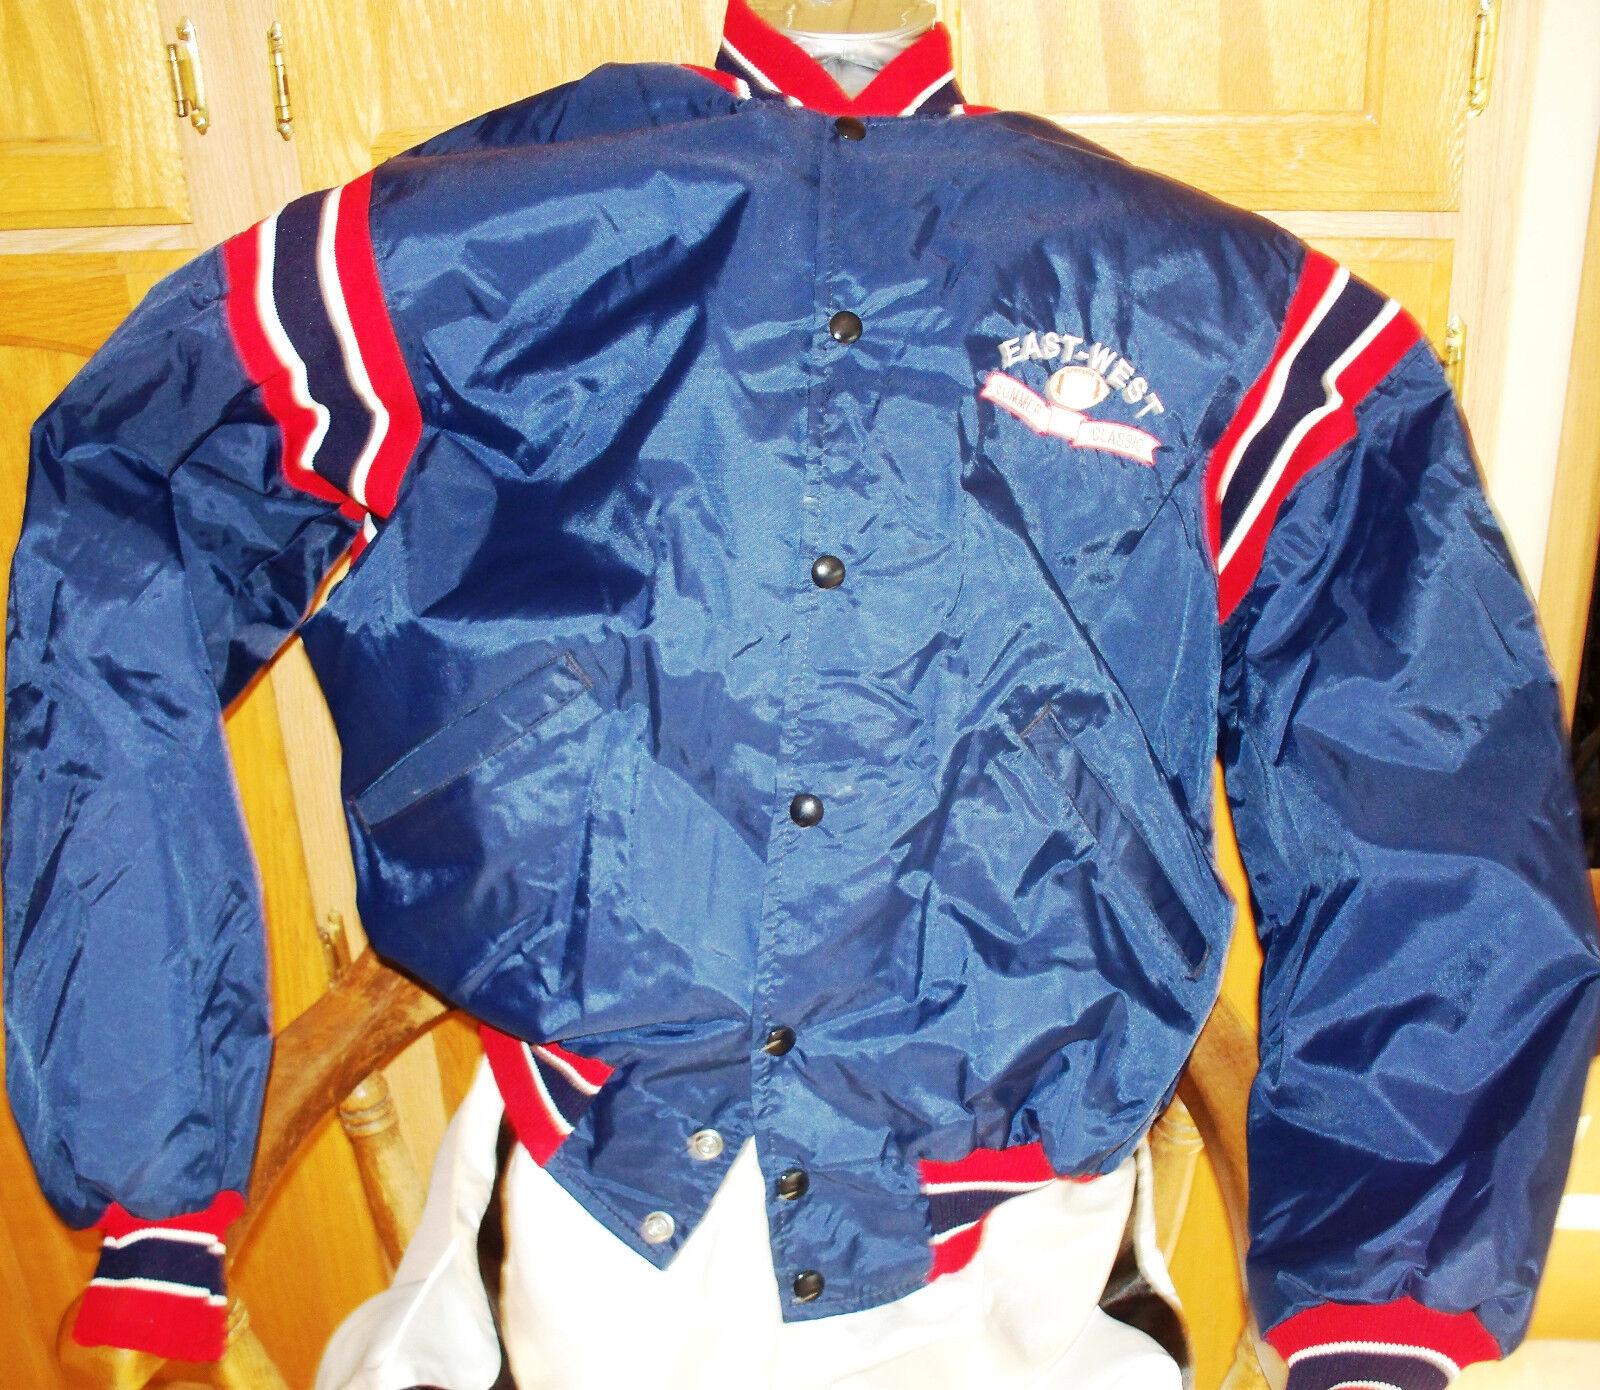 Authentic East/west State High School Satin/nylon Team Jacket